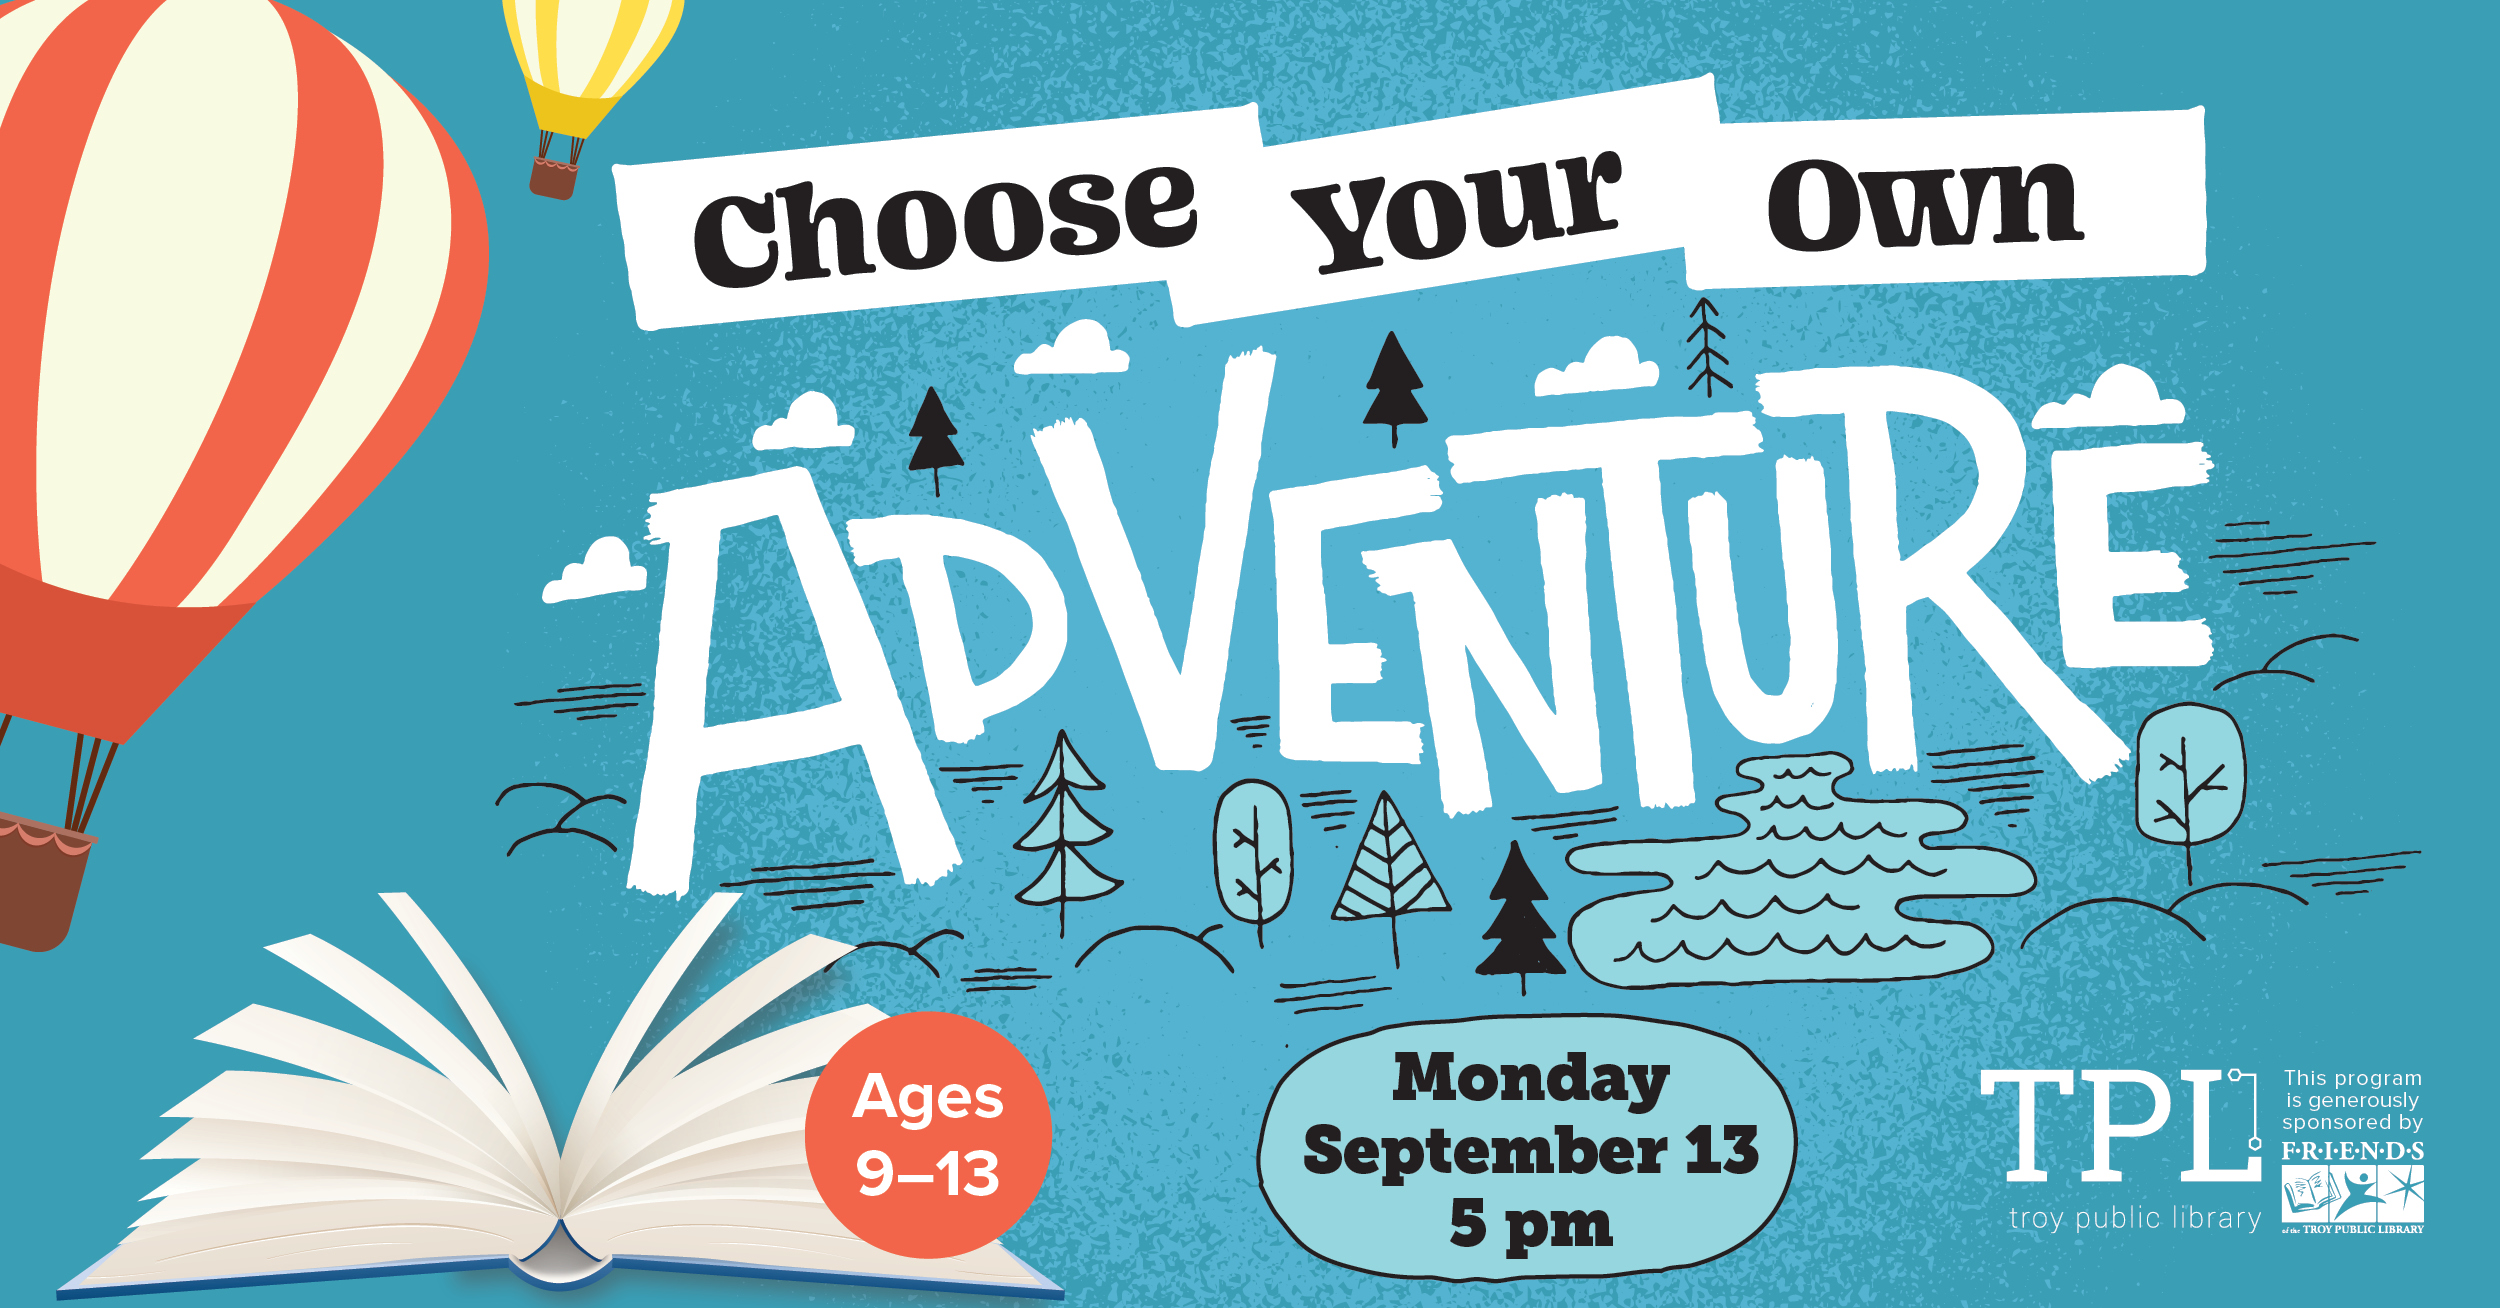 Choose Your Own Adventure Ages 9 to 13. Monday, September 13 at 5pm. Sponsored by the Friends of the Troy Public Library